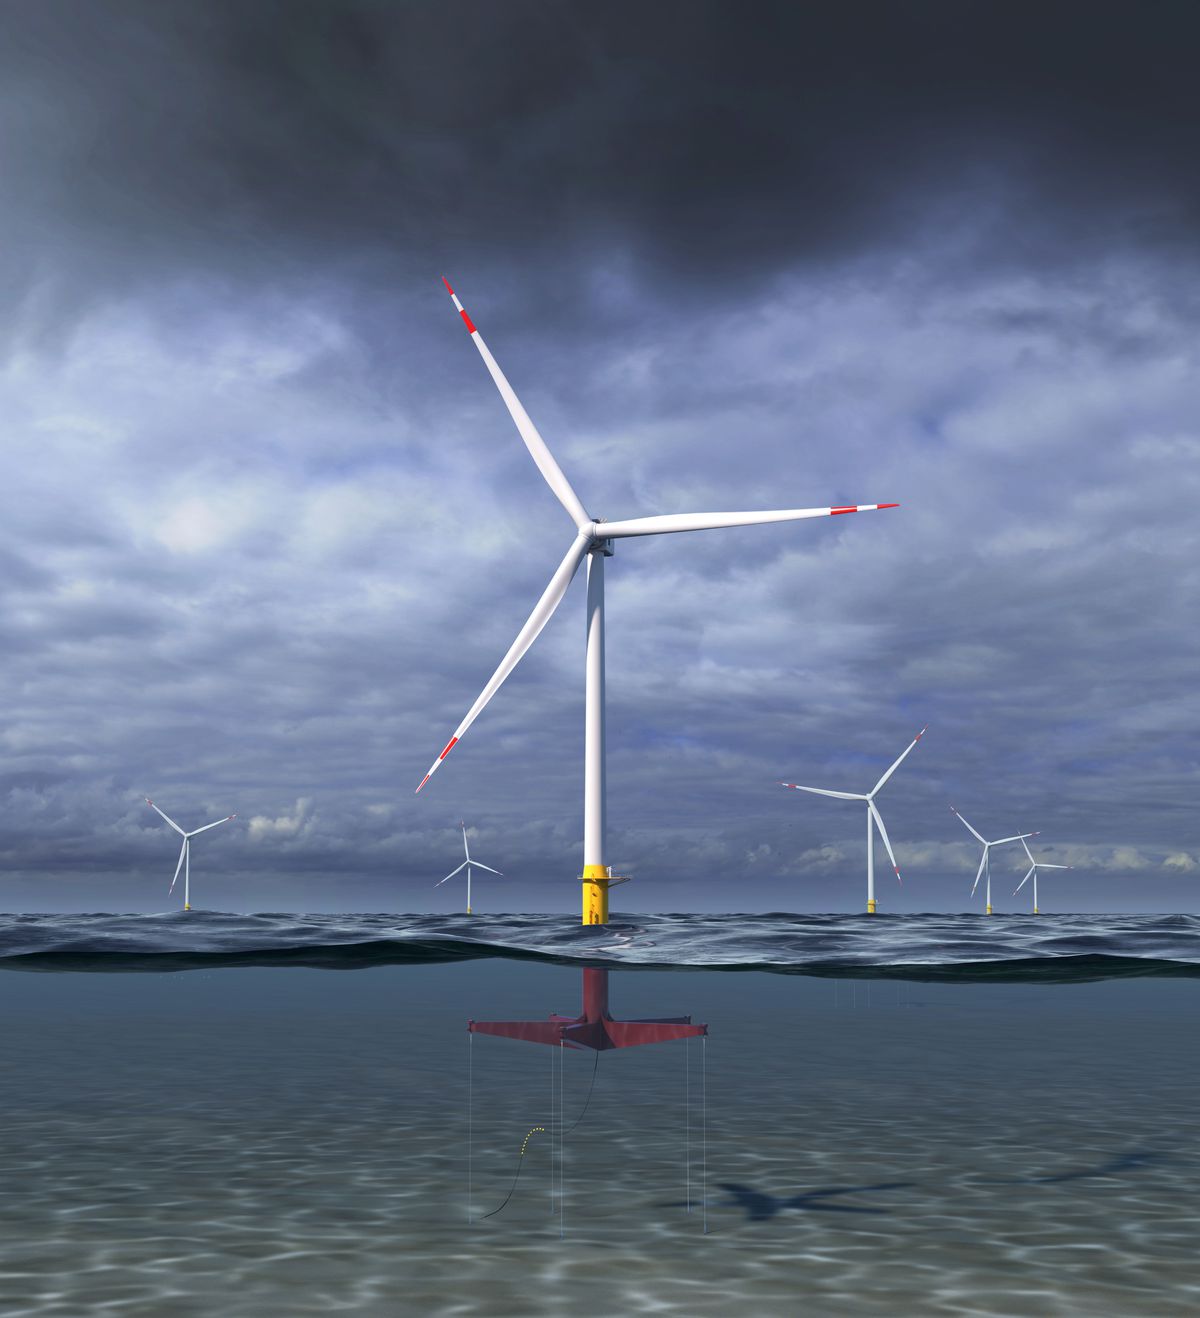 The design for GE’s floating wind turbine concept